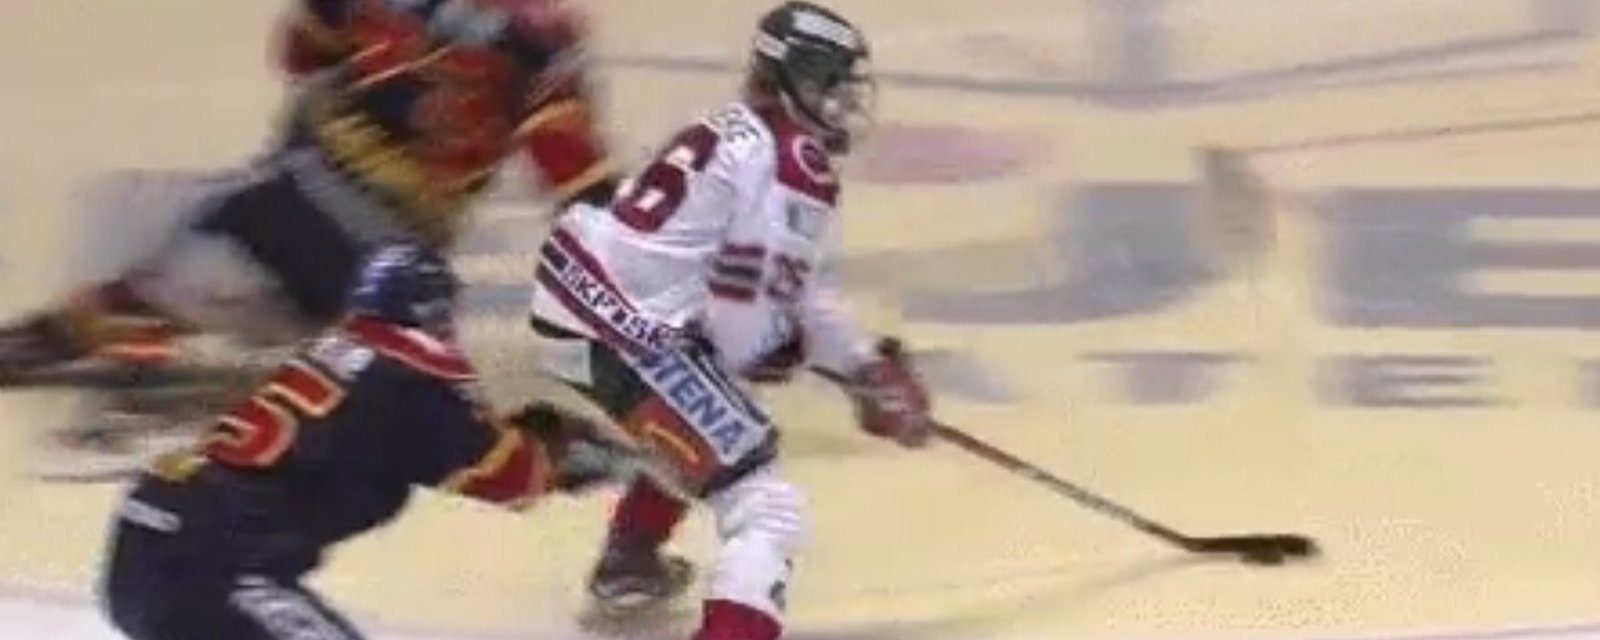 16-year-old shows off why he is expected to be a top pick in the 2018 draft.